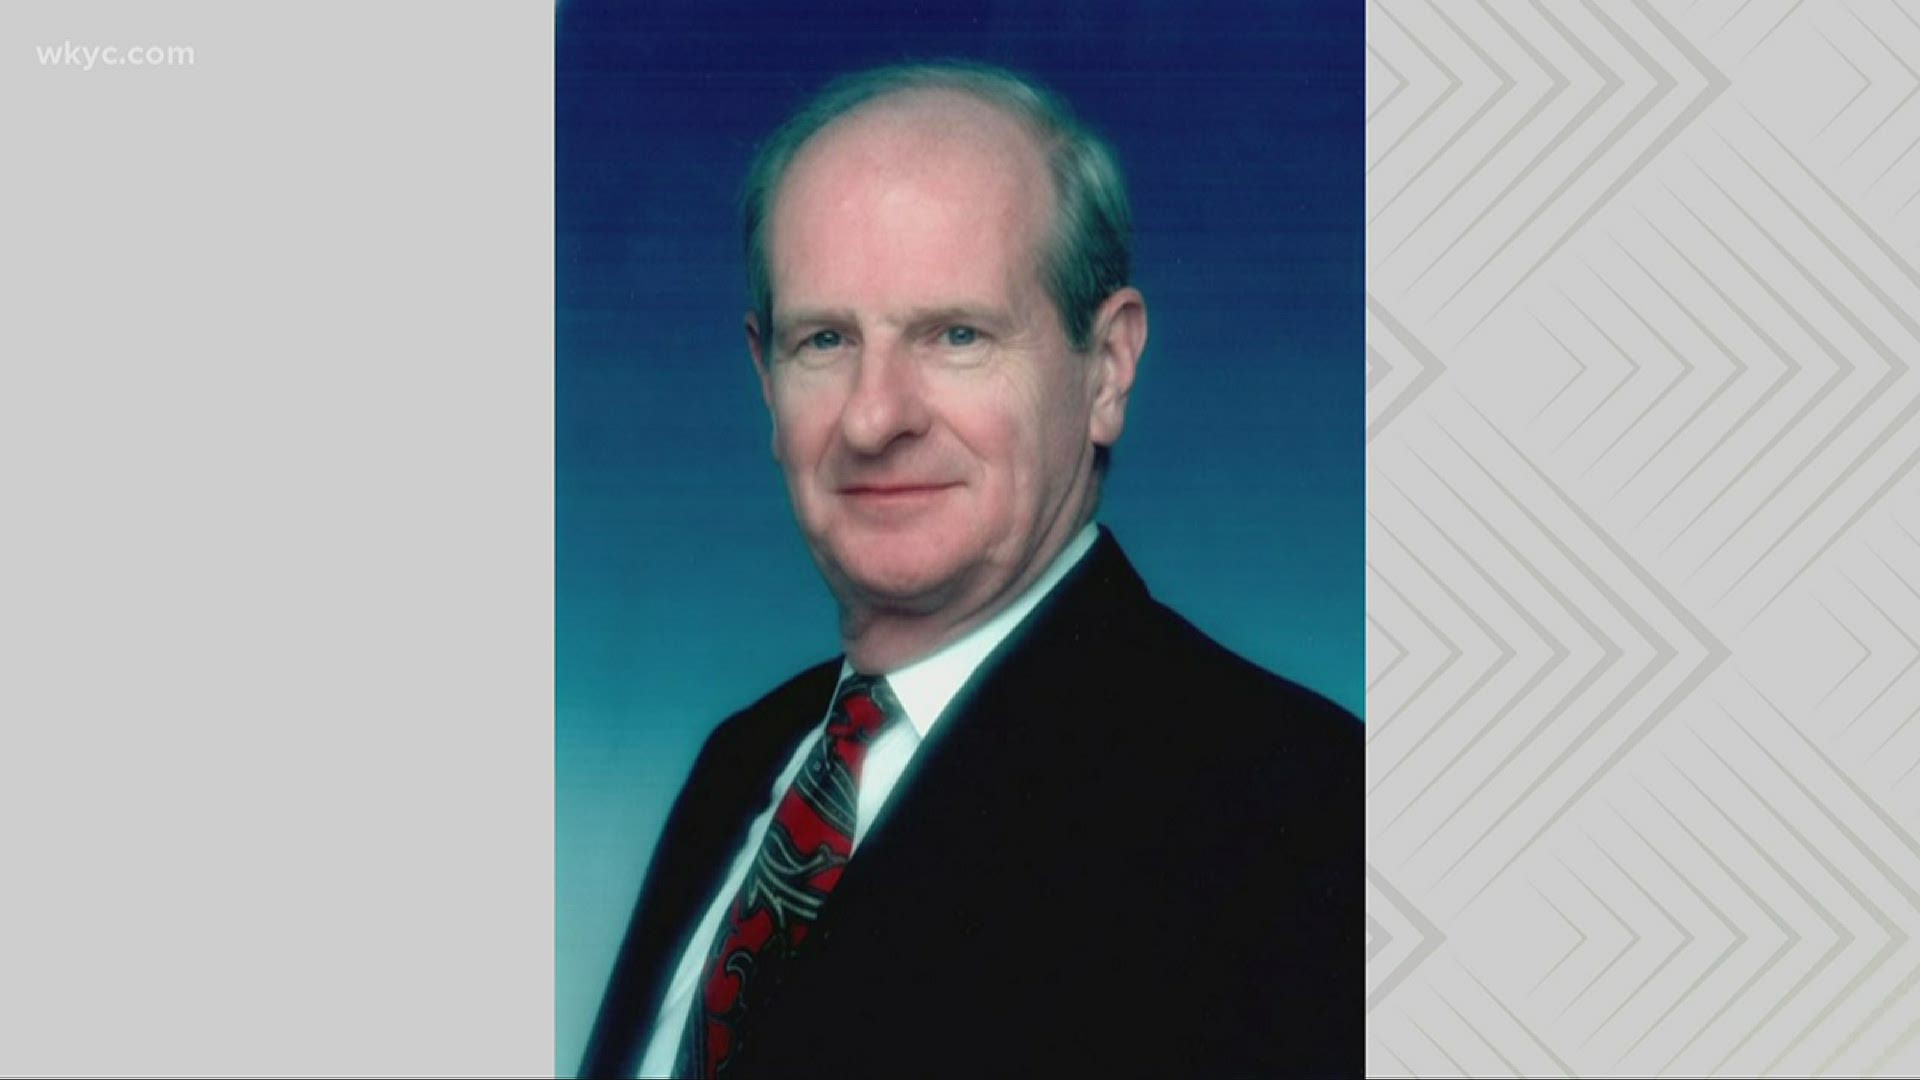 John Gill, known for representing John Demjanjuk died after suffering a heart attacked. He passed away at his Rocky River home with his wife.